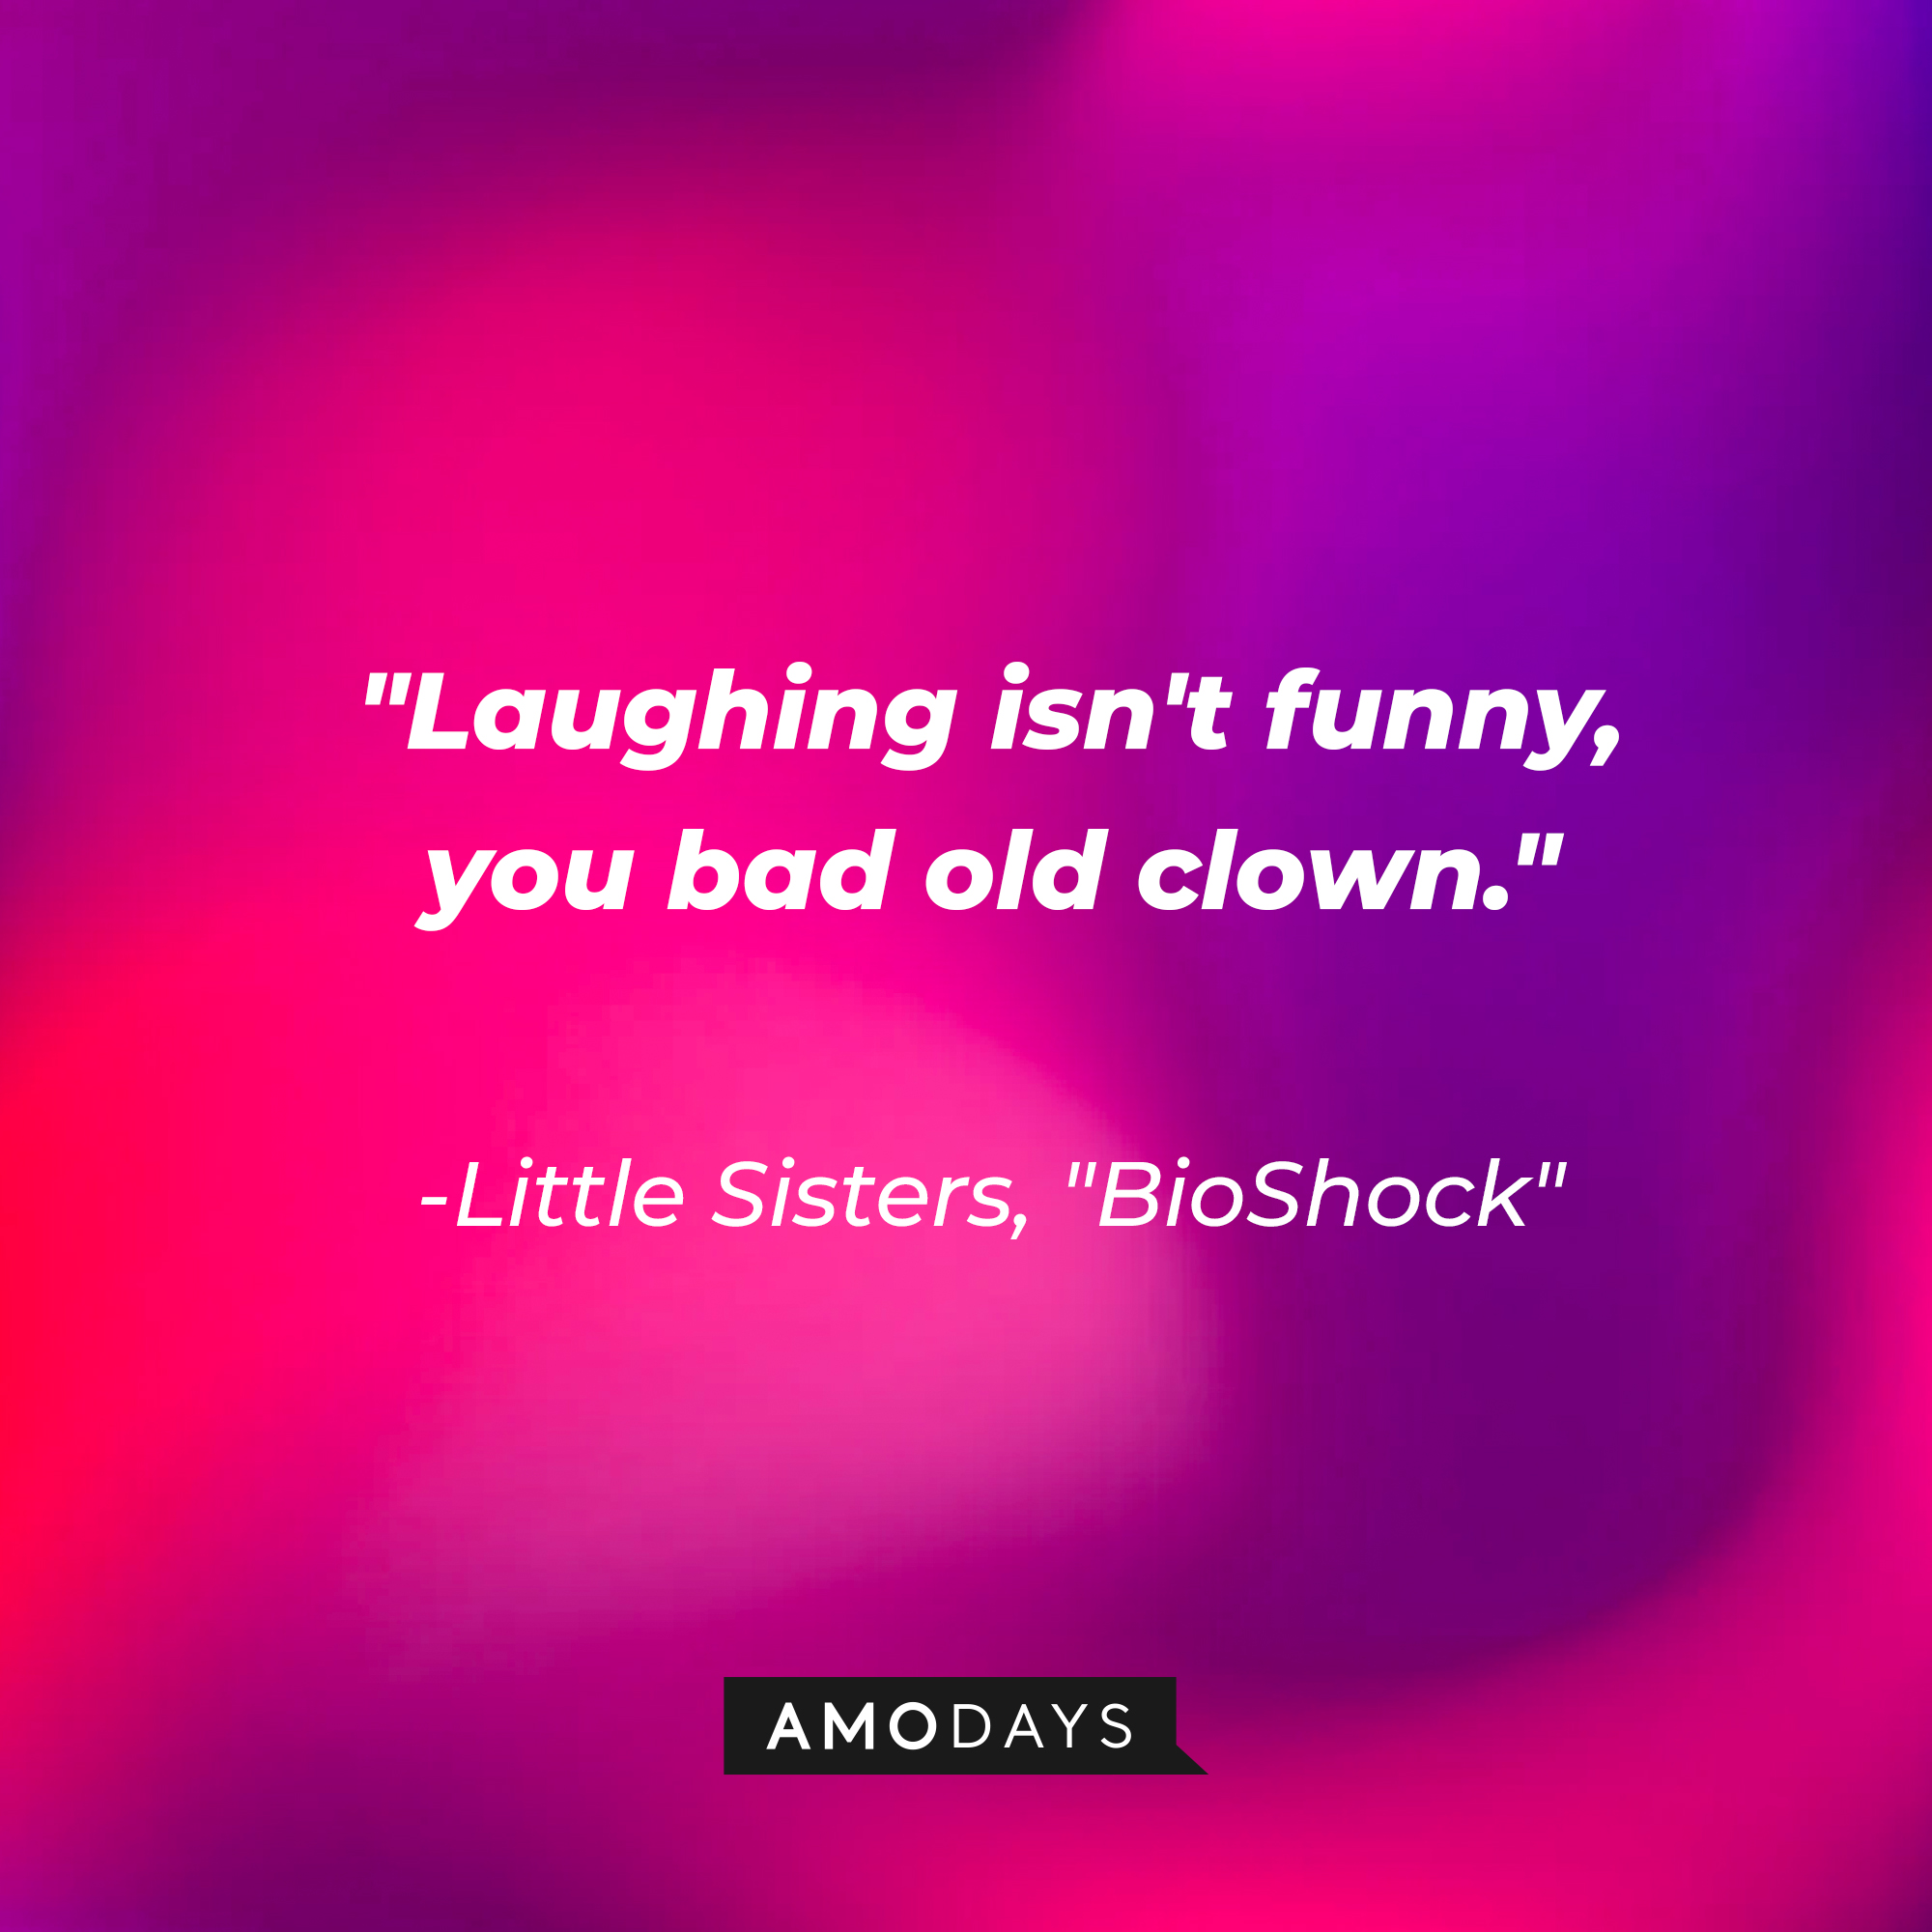 Little Sisters' quote from "BioShock:" "Laughing isn't funny, you bad old clown." | Source: AmoDays